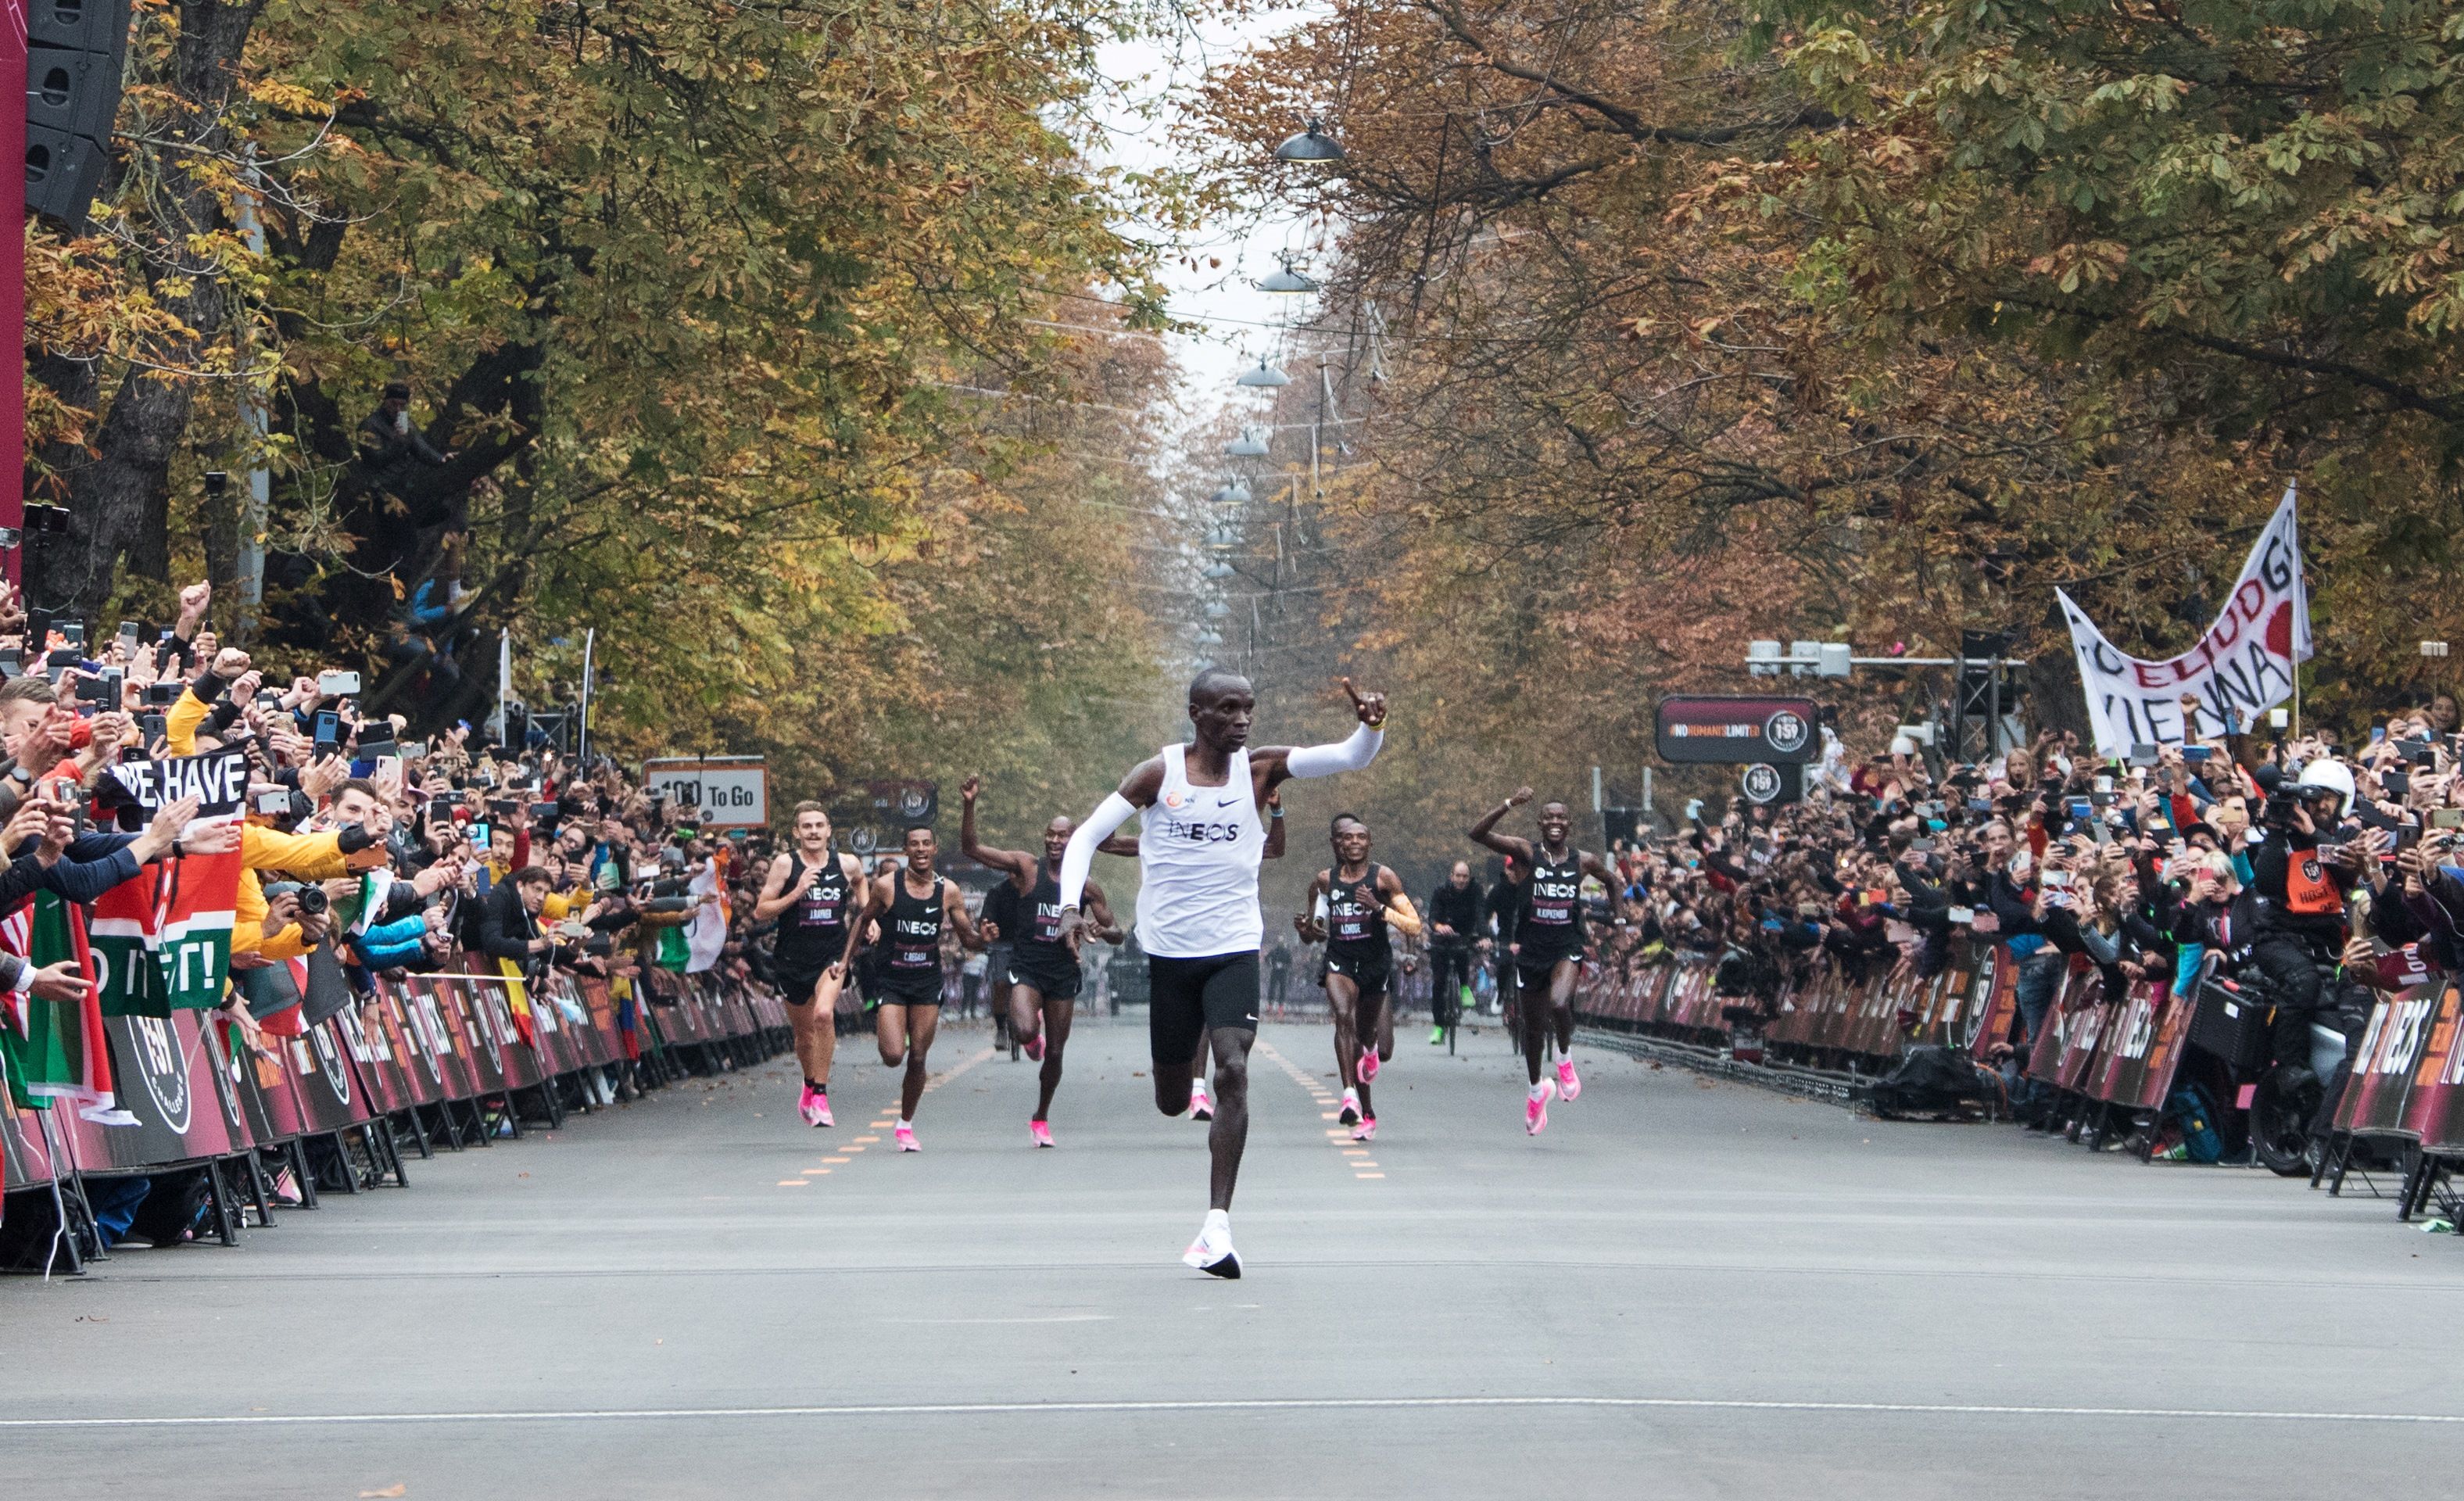 This image is a wideshot of Kipchoge running towards the finish line. Trees and spectators line either side of the road 